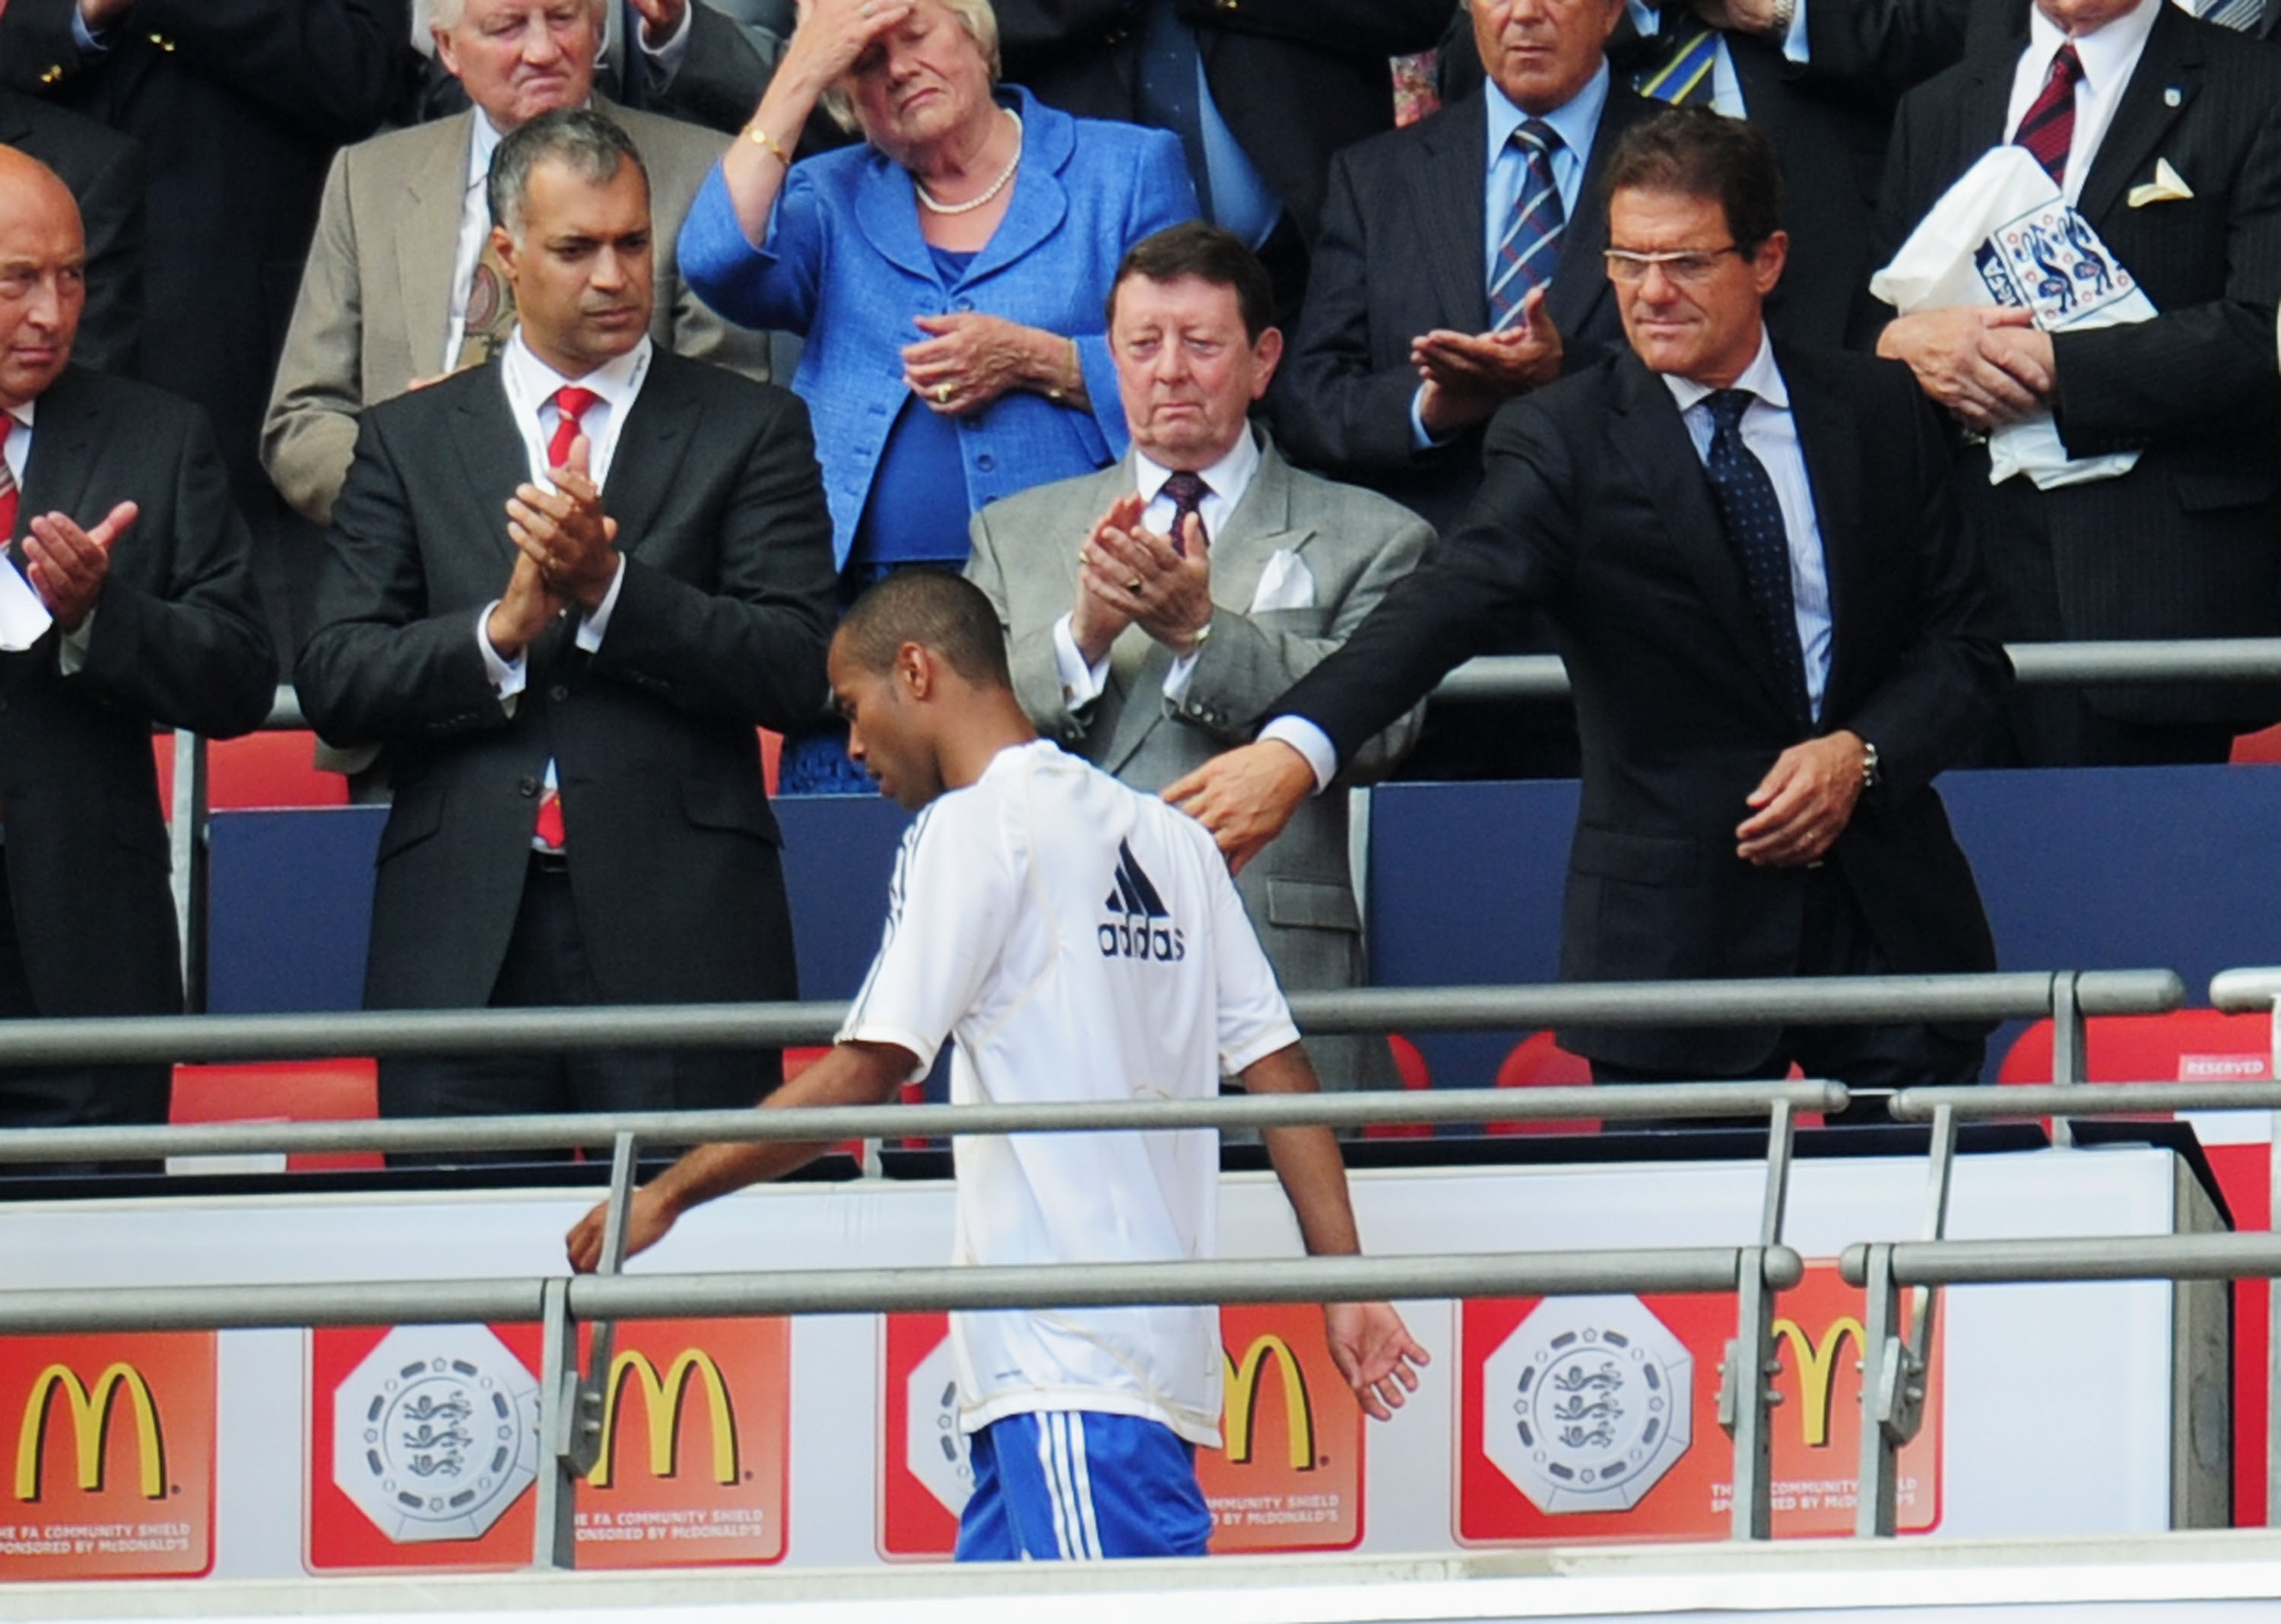 LONDON, ENGLAND - AUGUST 08:  Ashley Cole of Chelsea walks past England manager Fabio Capello as he collects his medal after defeat in the FA Community Shield match between Chelsea and Manchester United at Wembley Stadium on August 8, 2010 in London, Engl